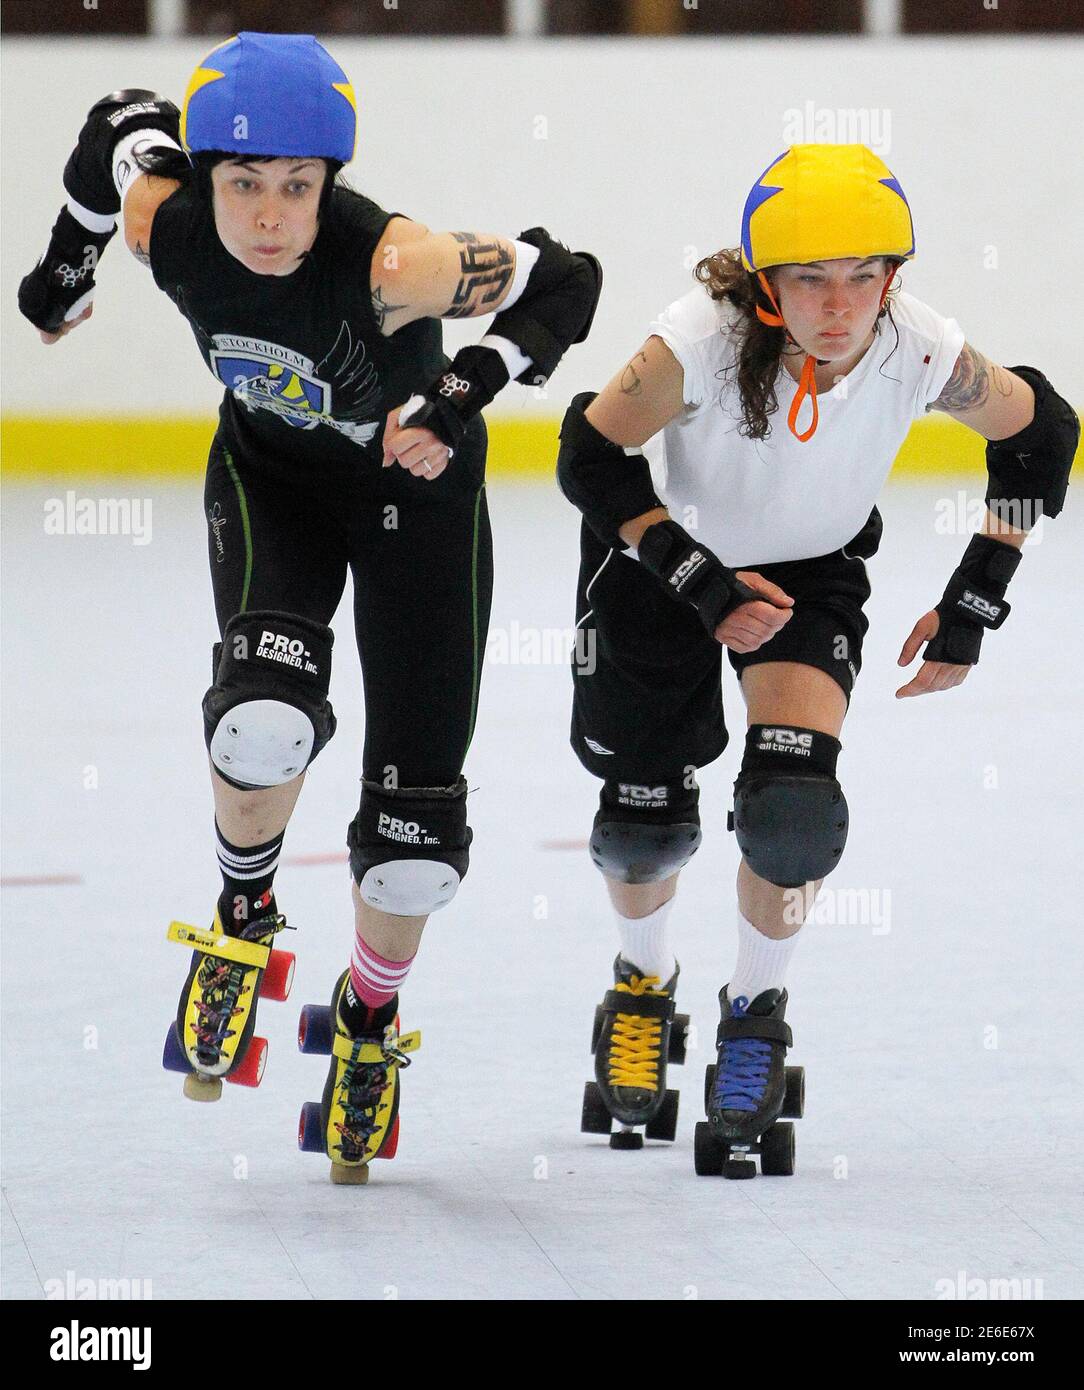 Skaters from the Stockholm Roller Derby work out during a practice session  before their women's flat track roller derby bout against the Kallio  Rolling Rainbow in Huddinge June 9, 2011. Flat track